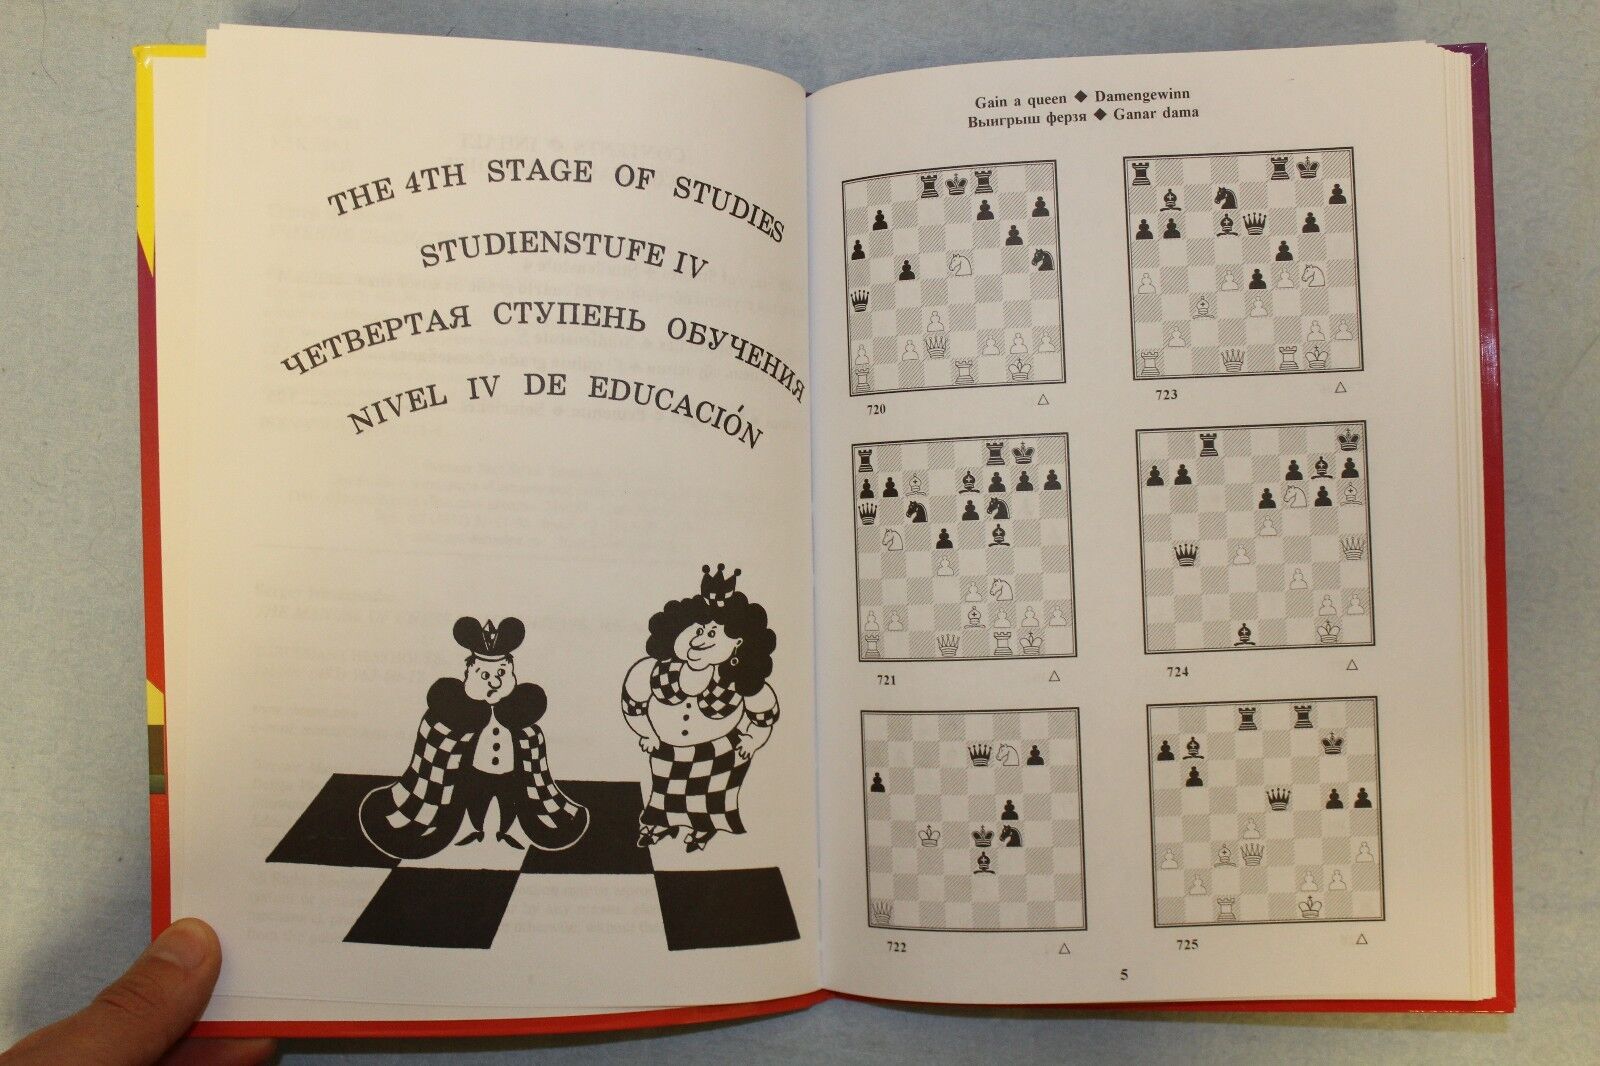 11899.Two Chess Books: Ivashchenko.Manual of Chess Combinations. Volumes 1a,1b. 2016